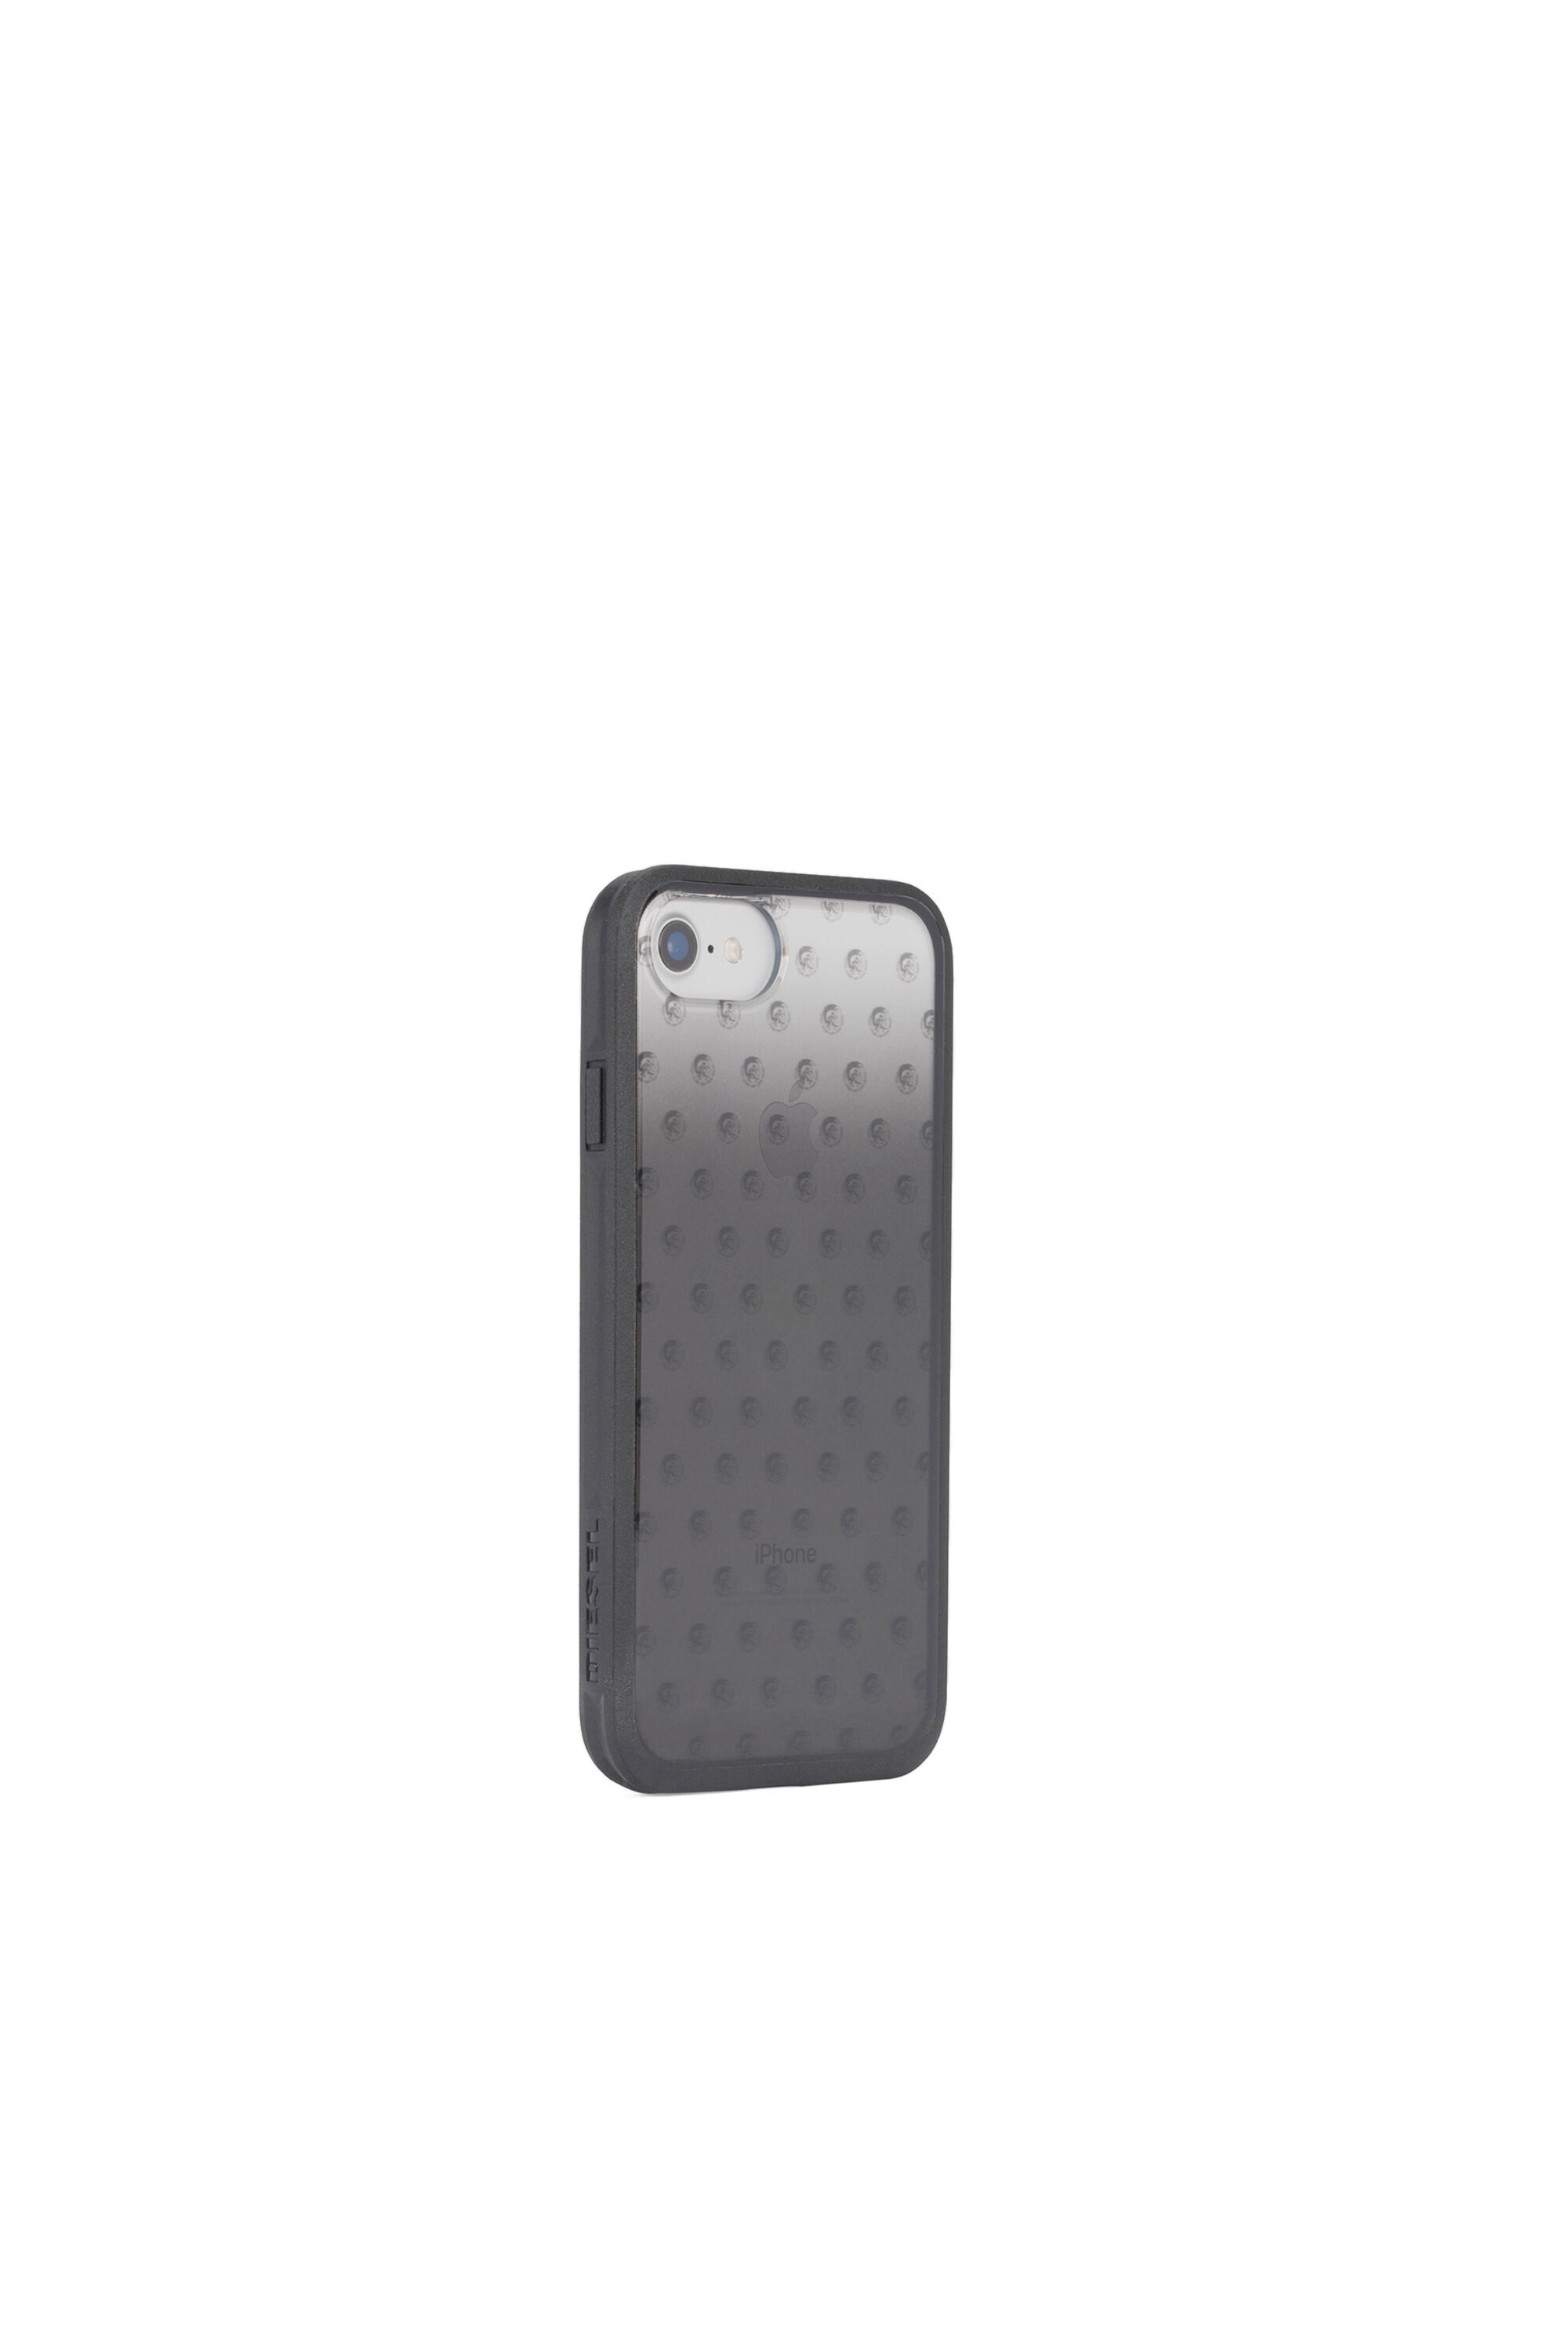 Diesel - MOHICAN HEAD DOTS BLACK IPHONE 8/7/6s/6 CASE,  - Image 4